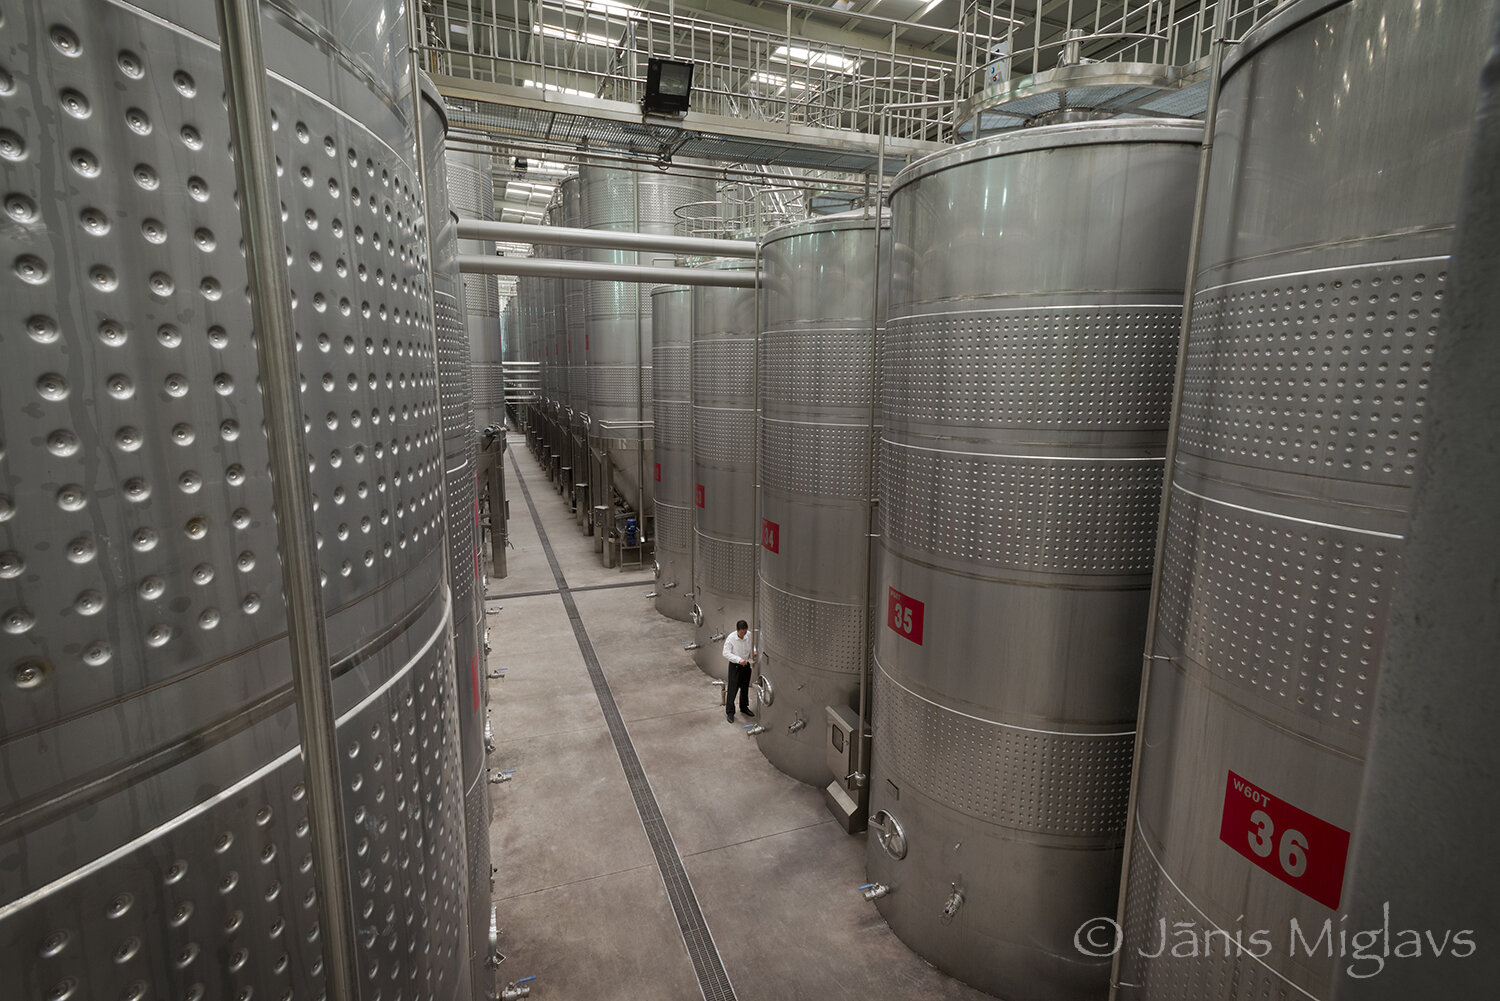 The stainless steel tanks dwarf Chinese winemaker in the Chateau Moser winery.